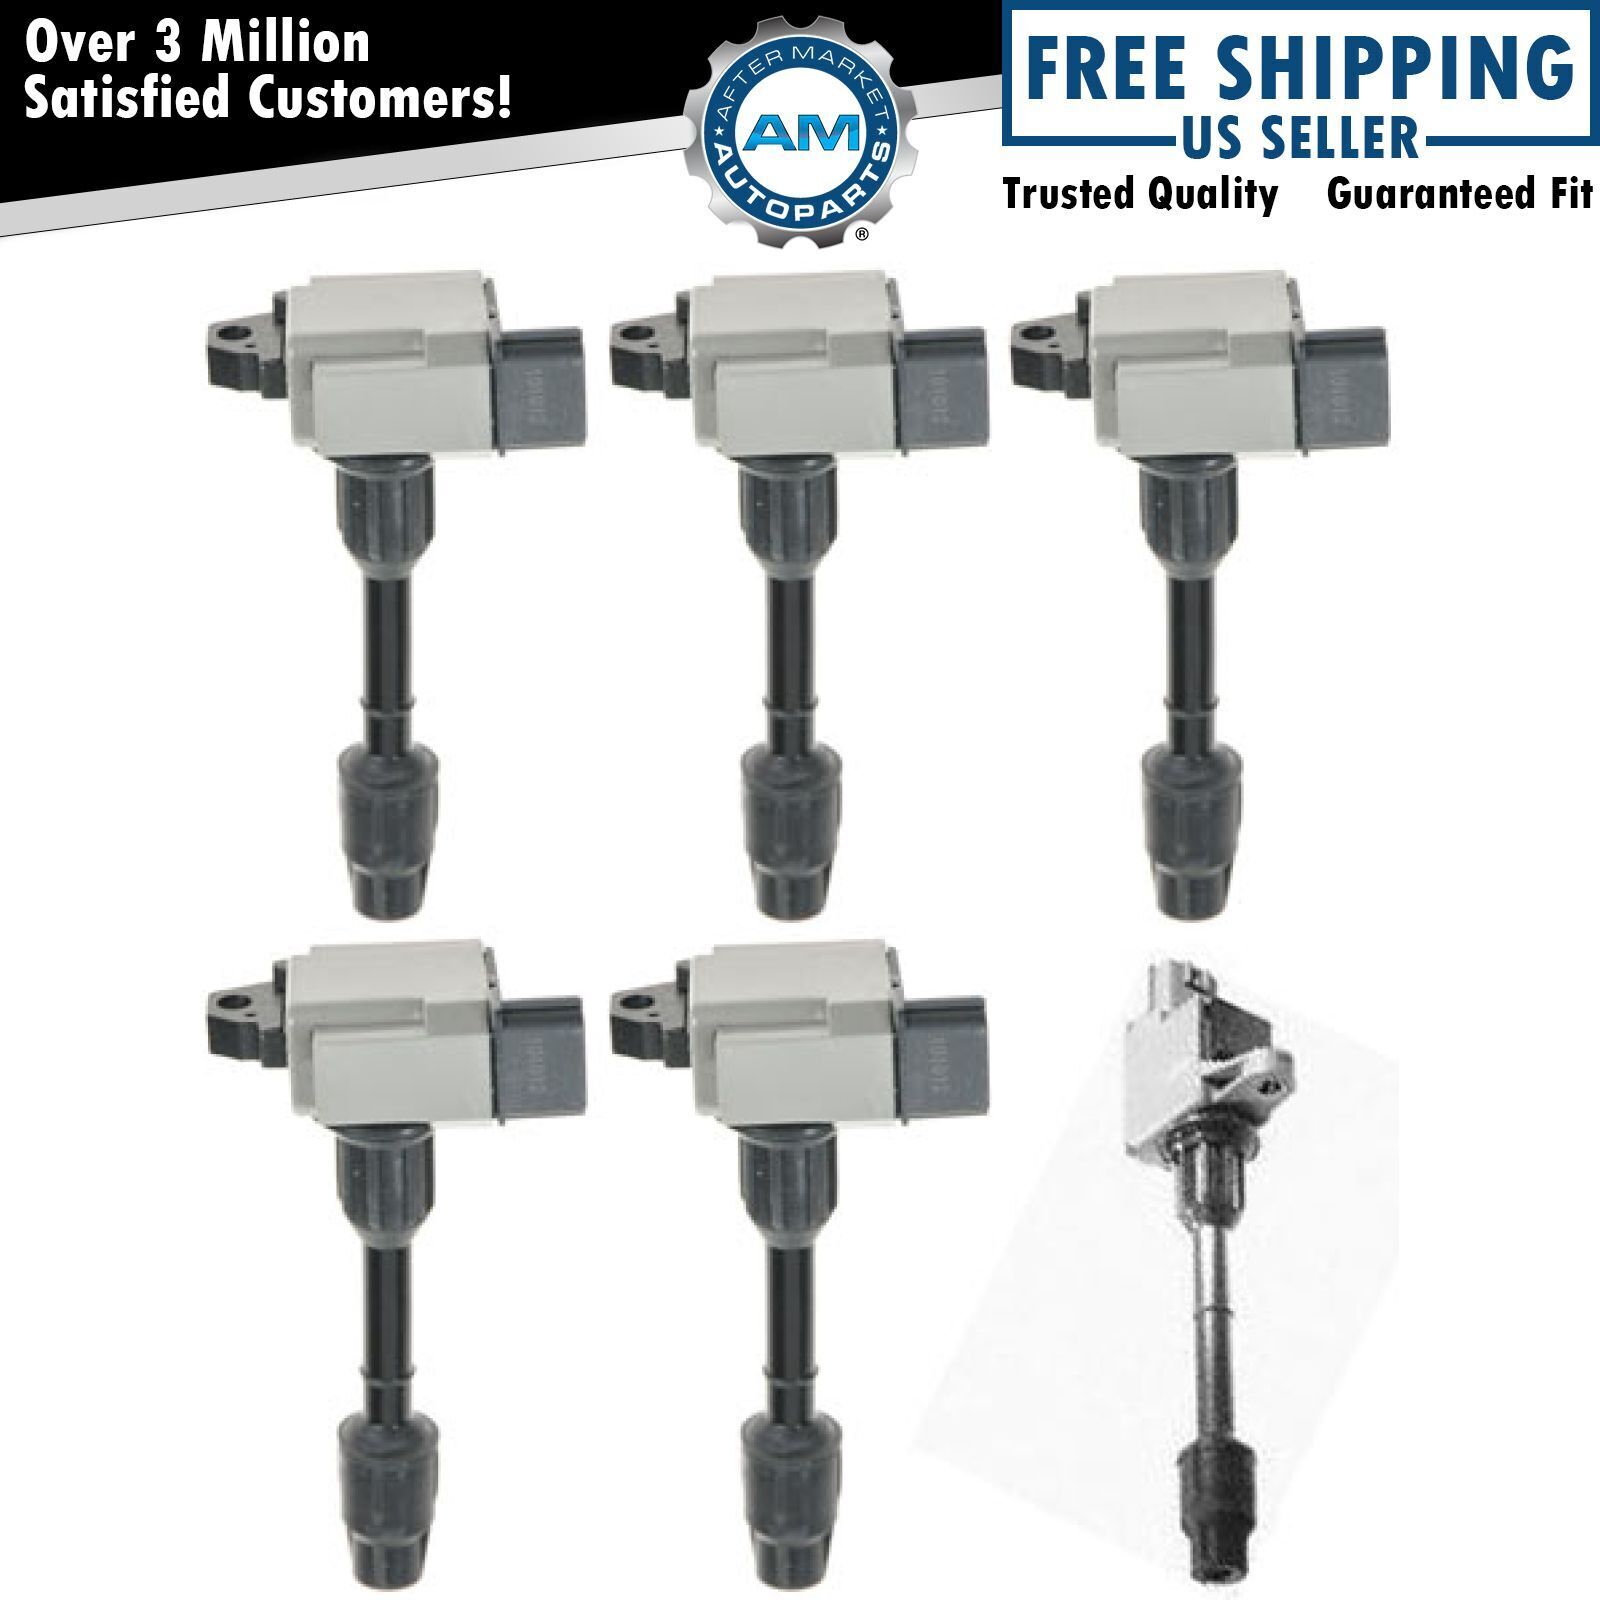 Ignition Coil Full Set Kit 6 piece for 2001 Nissan Pathfinder Infiniti QX4